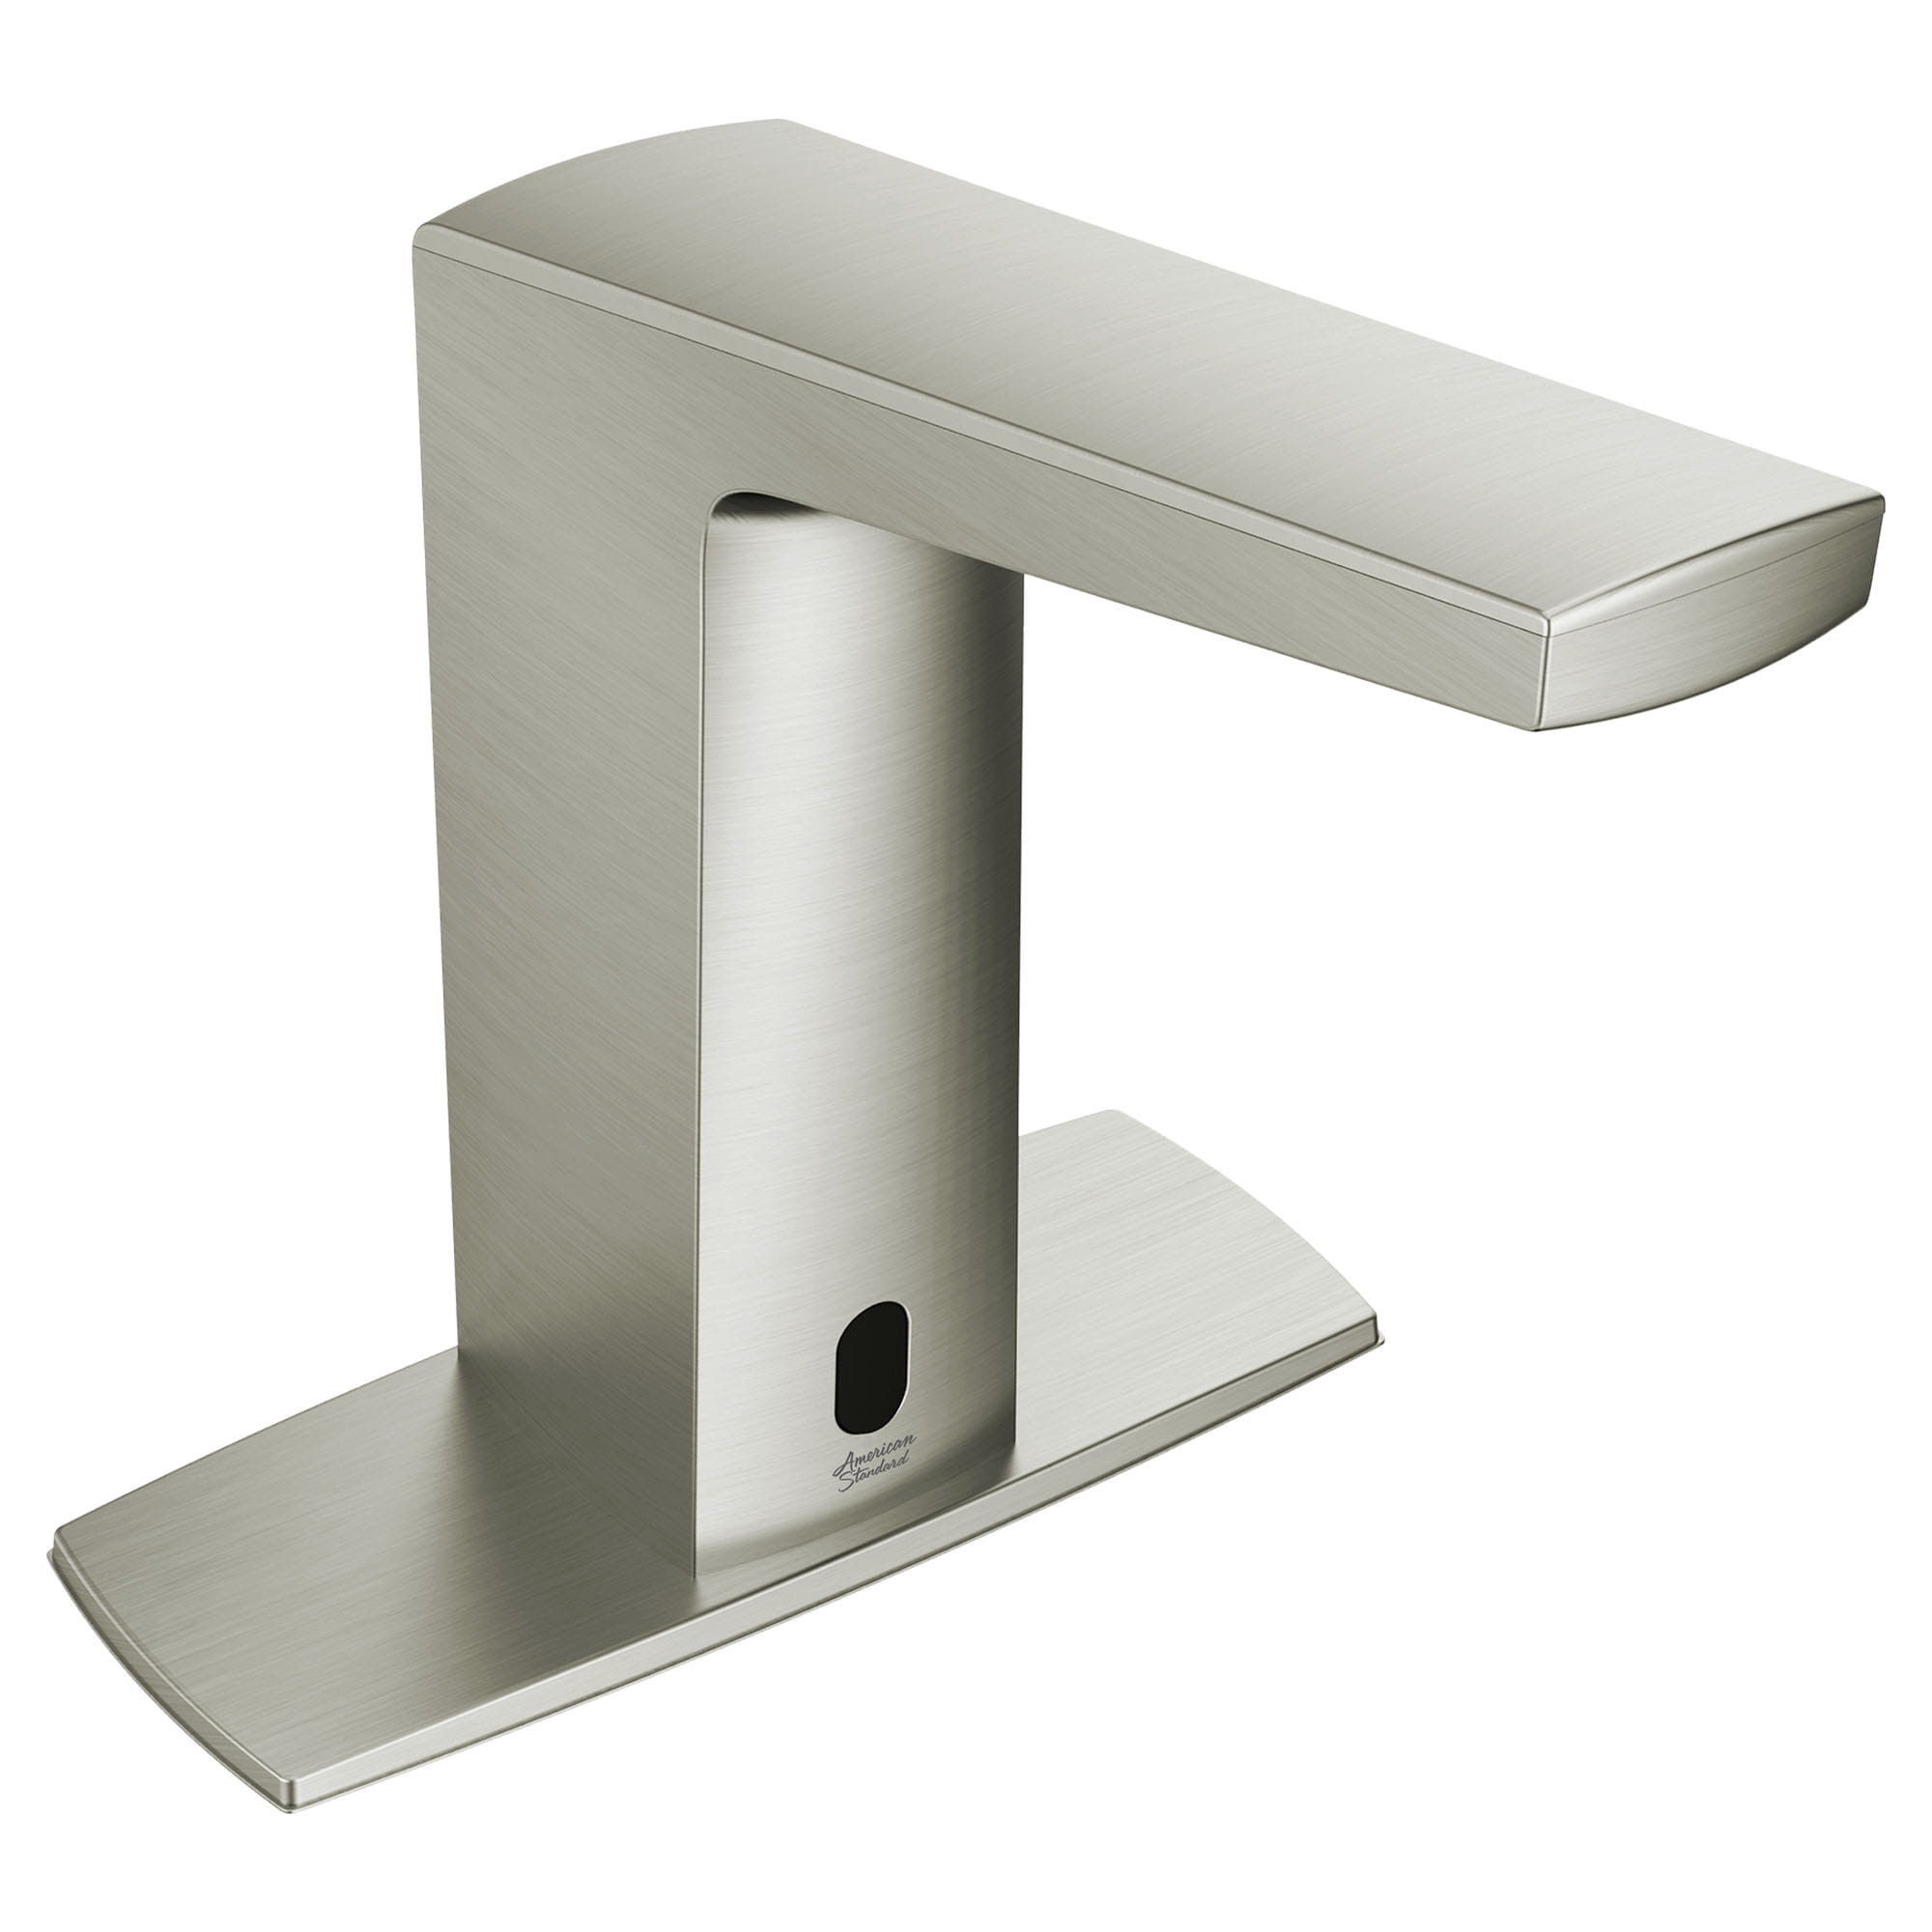 Paradigm® Selectronic® Touchless Faucet, Battery-Powered With SmarTherm Safety Shut-Off + ADM, 0.5 gpm/1.9 Lpm